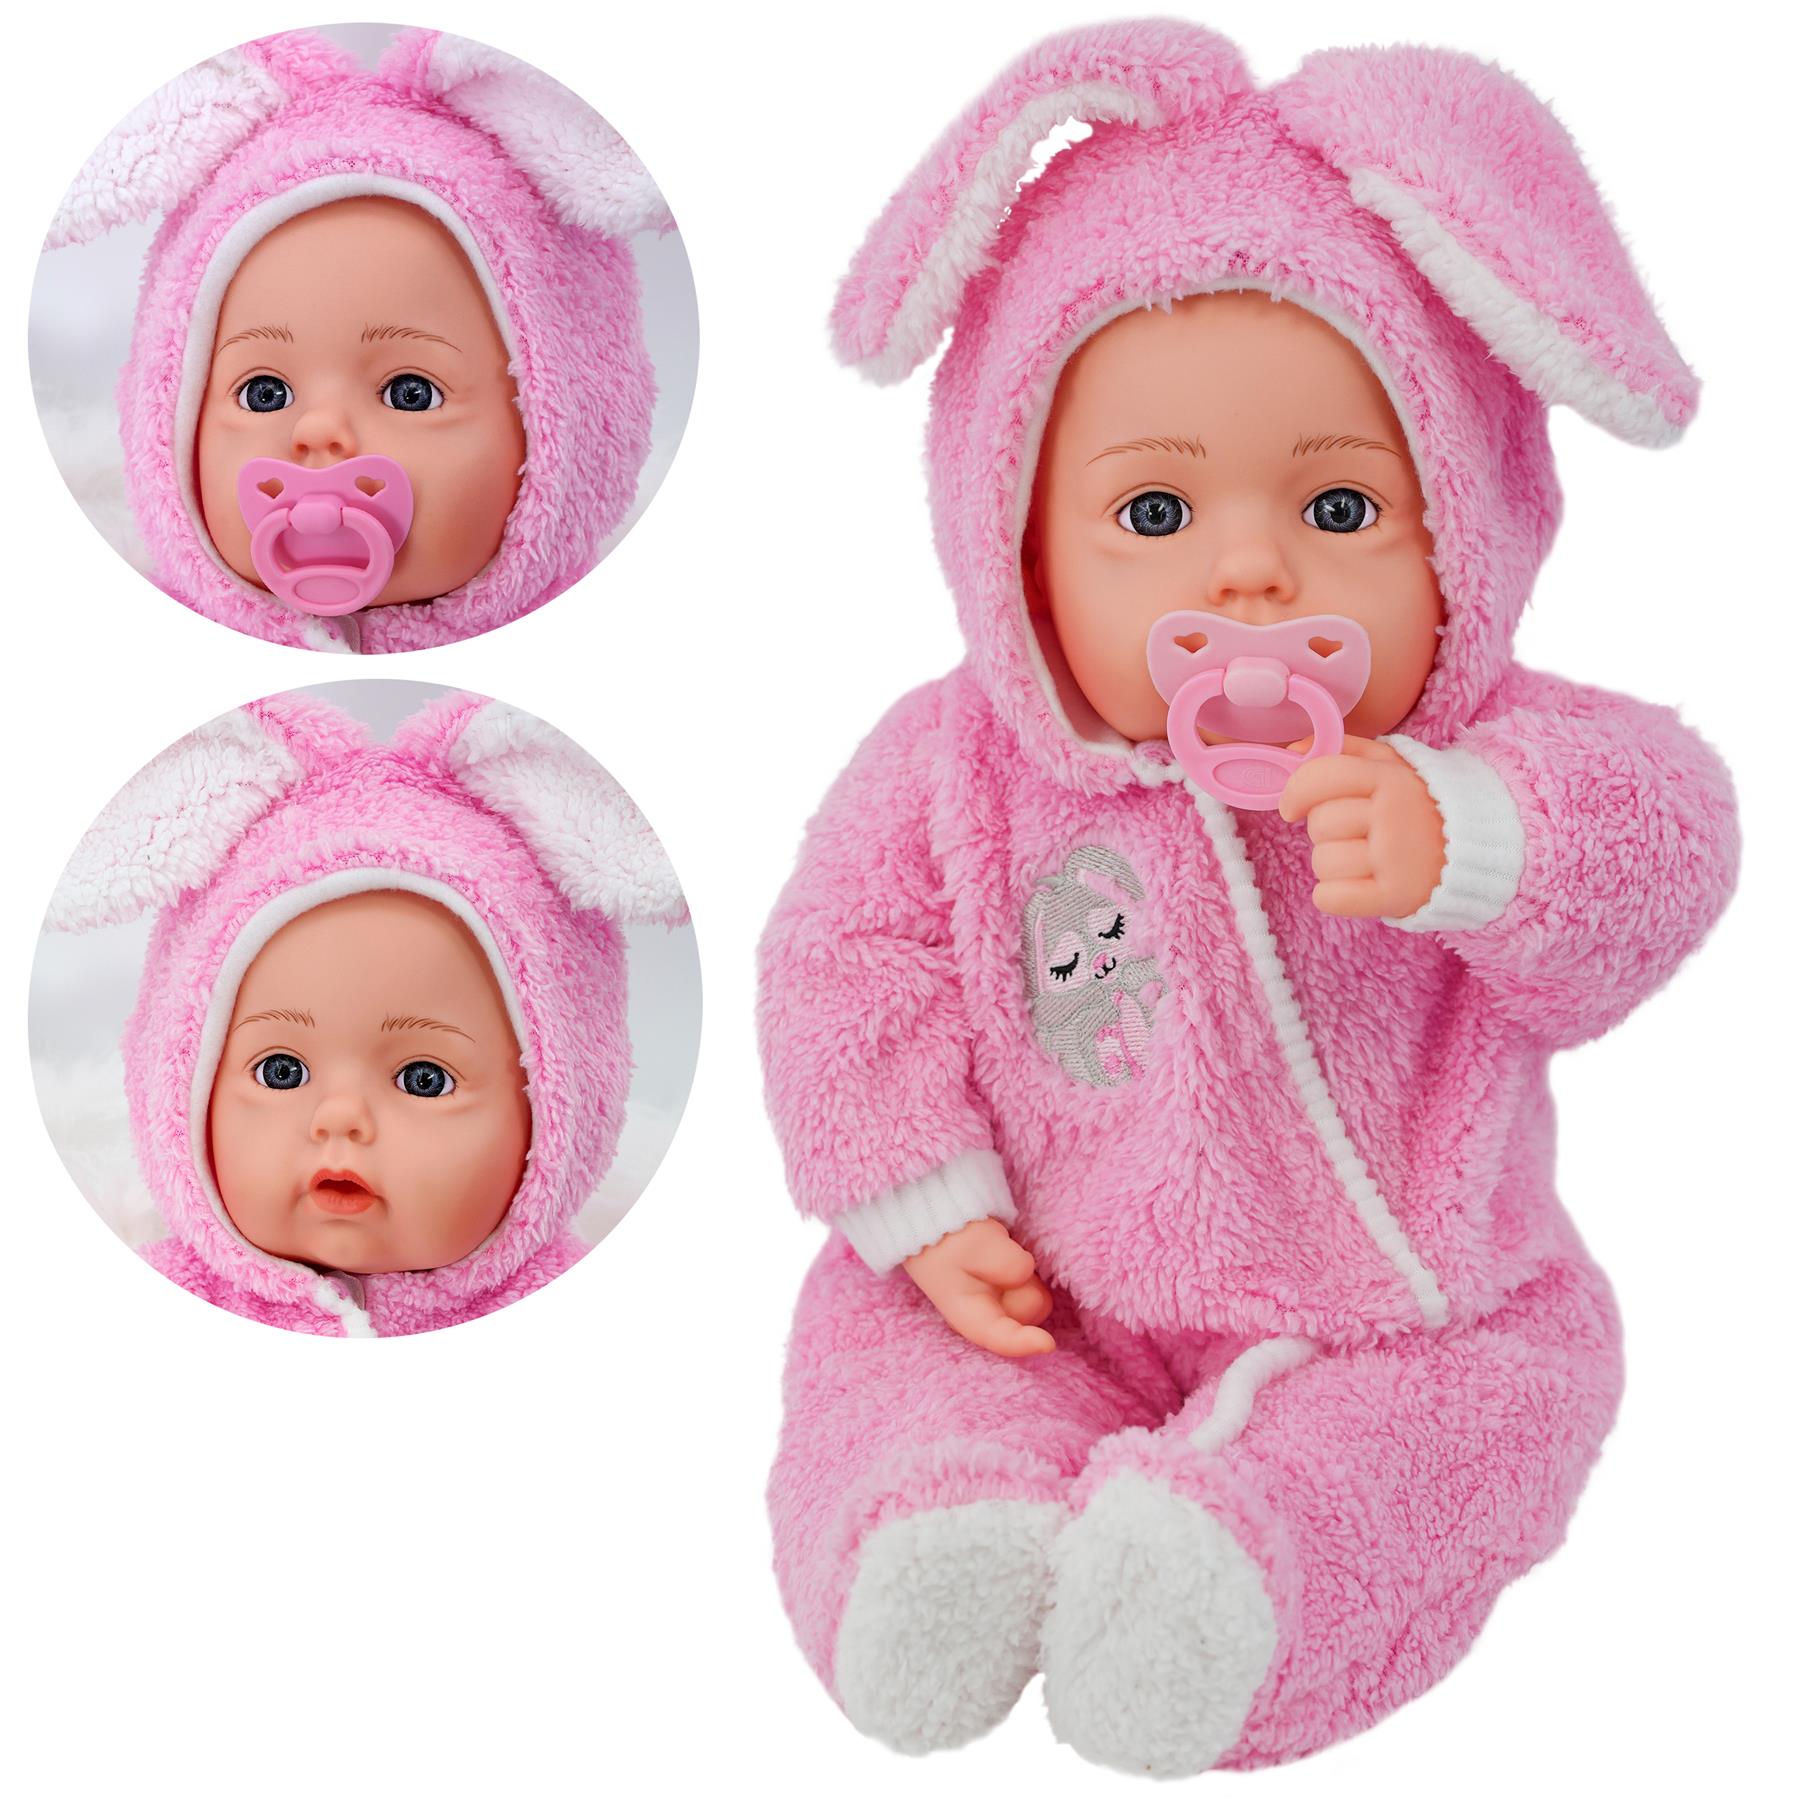 20” Bibi Girl Doll In Baby Pink Jumpsuit by BiBi Doll - The Magic Toy Shop